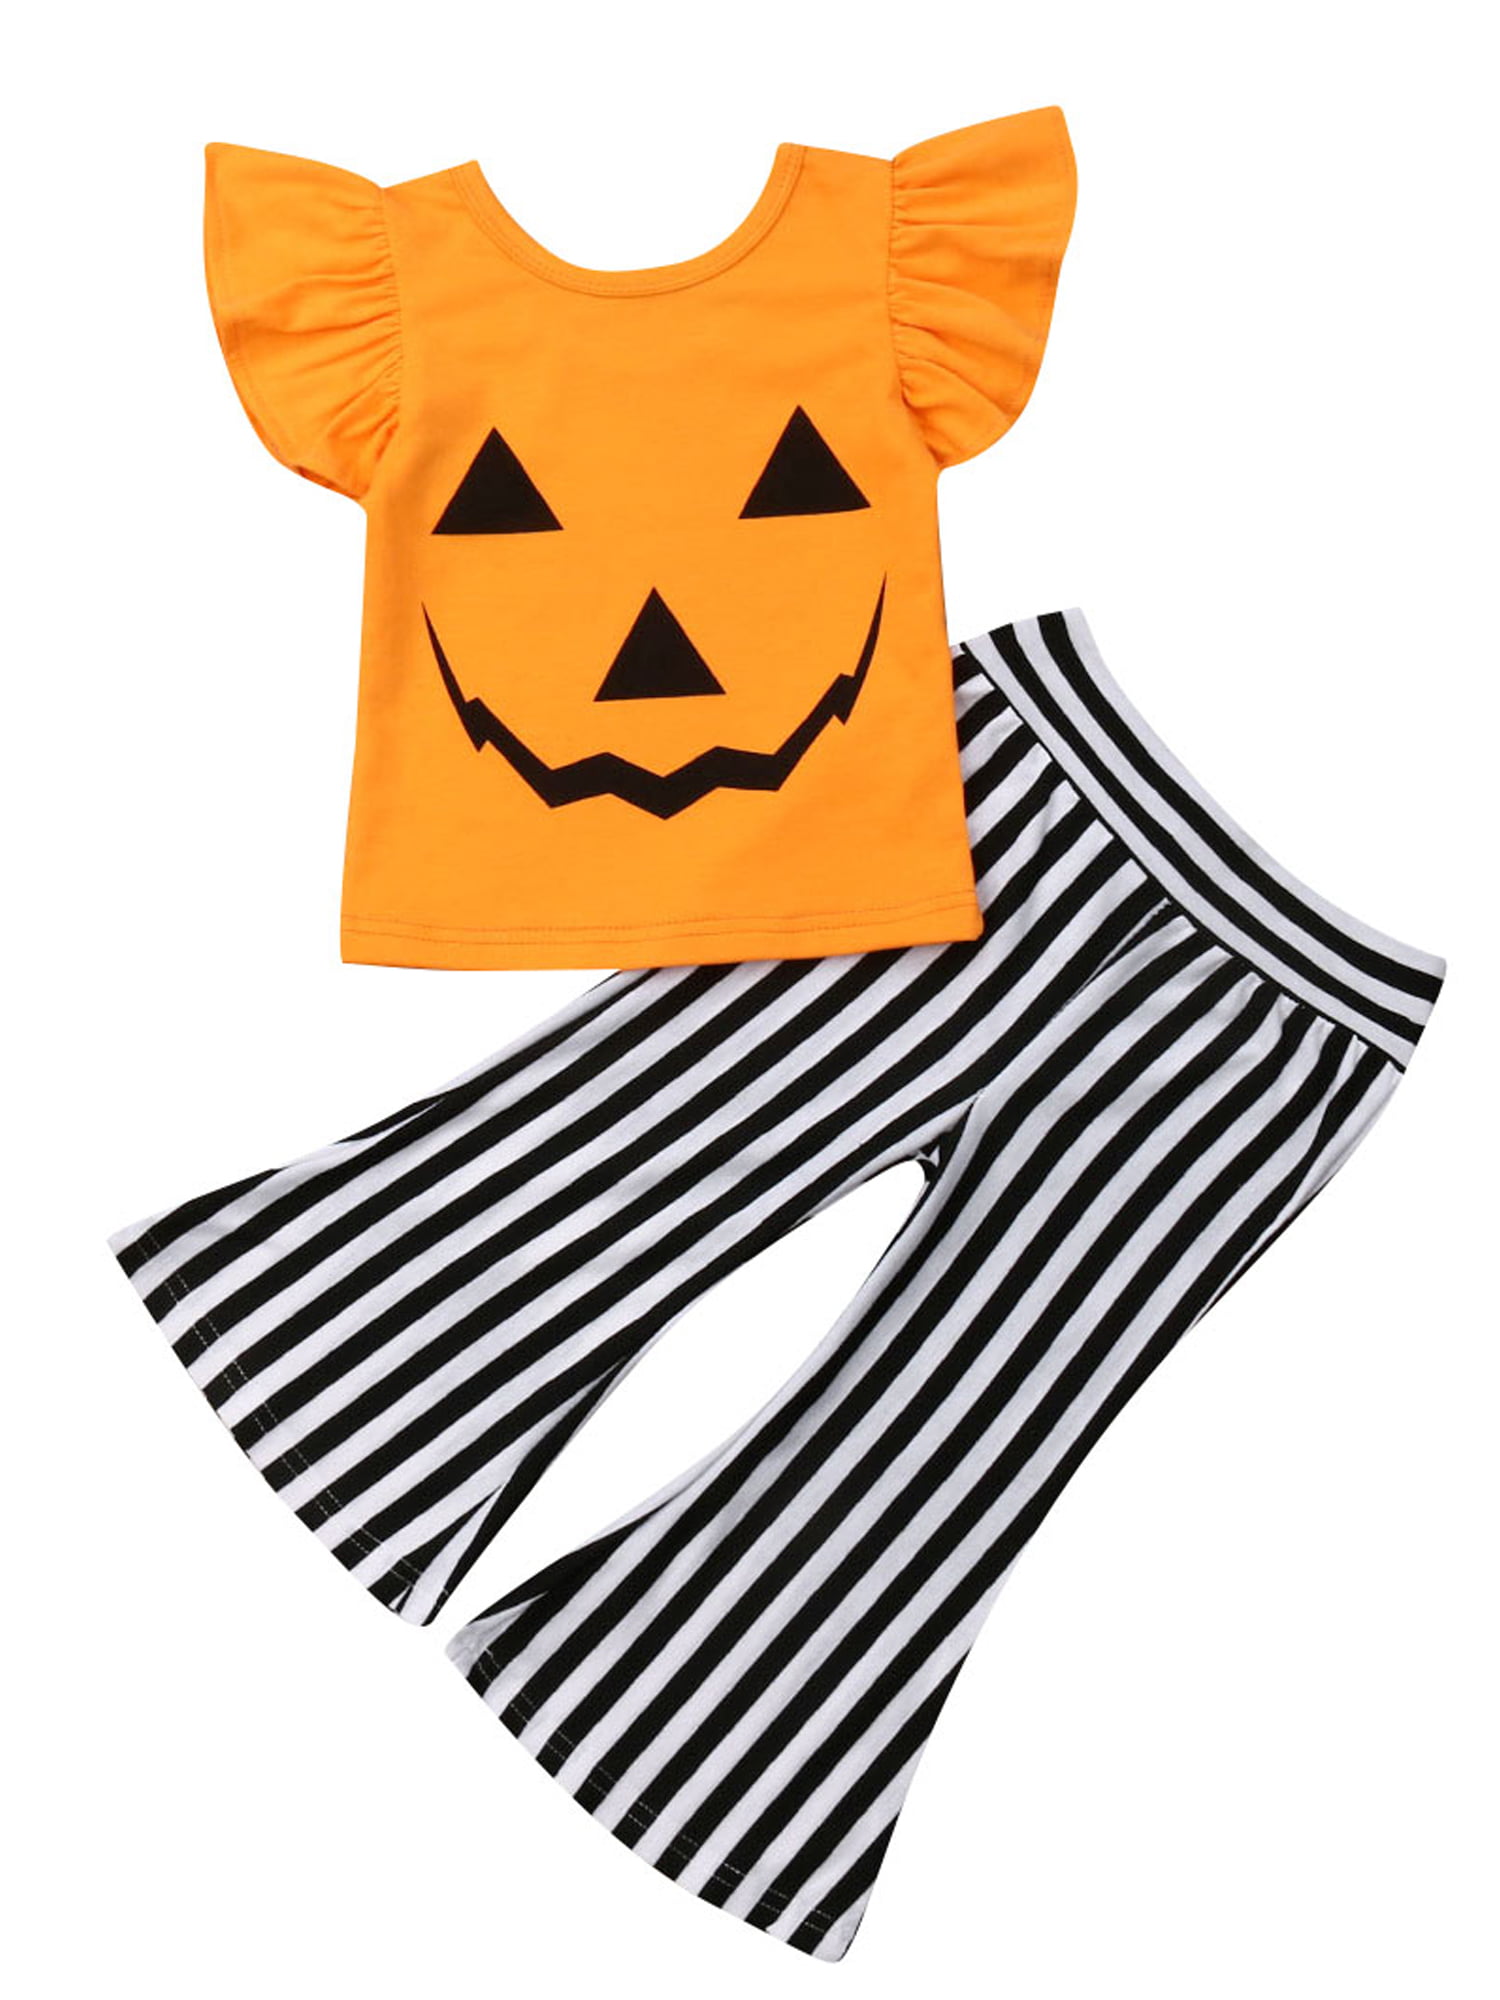 Toddler Baby Boys Girls Cartoon Ghost Tops Pullover Pants Halloween Outfits Set 